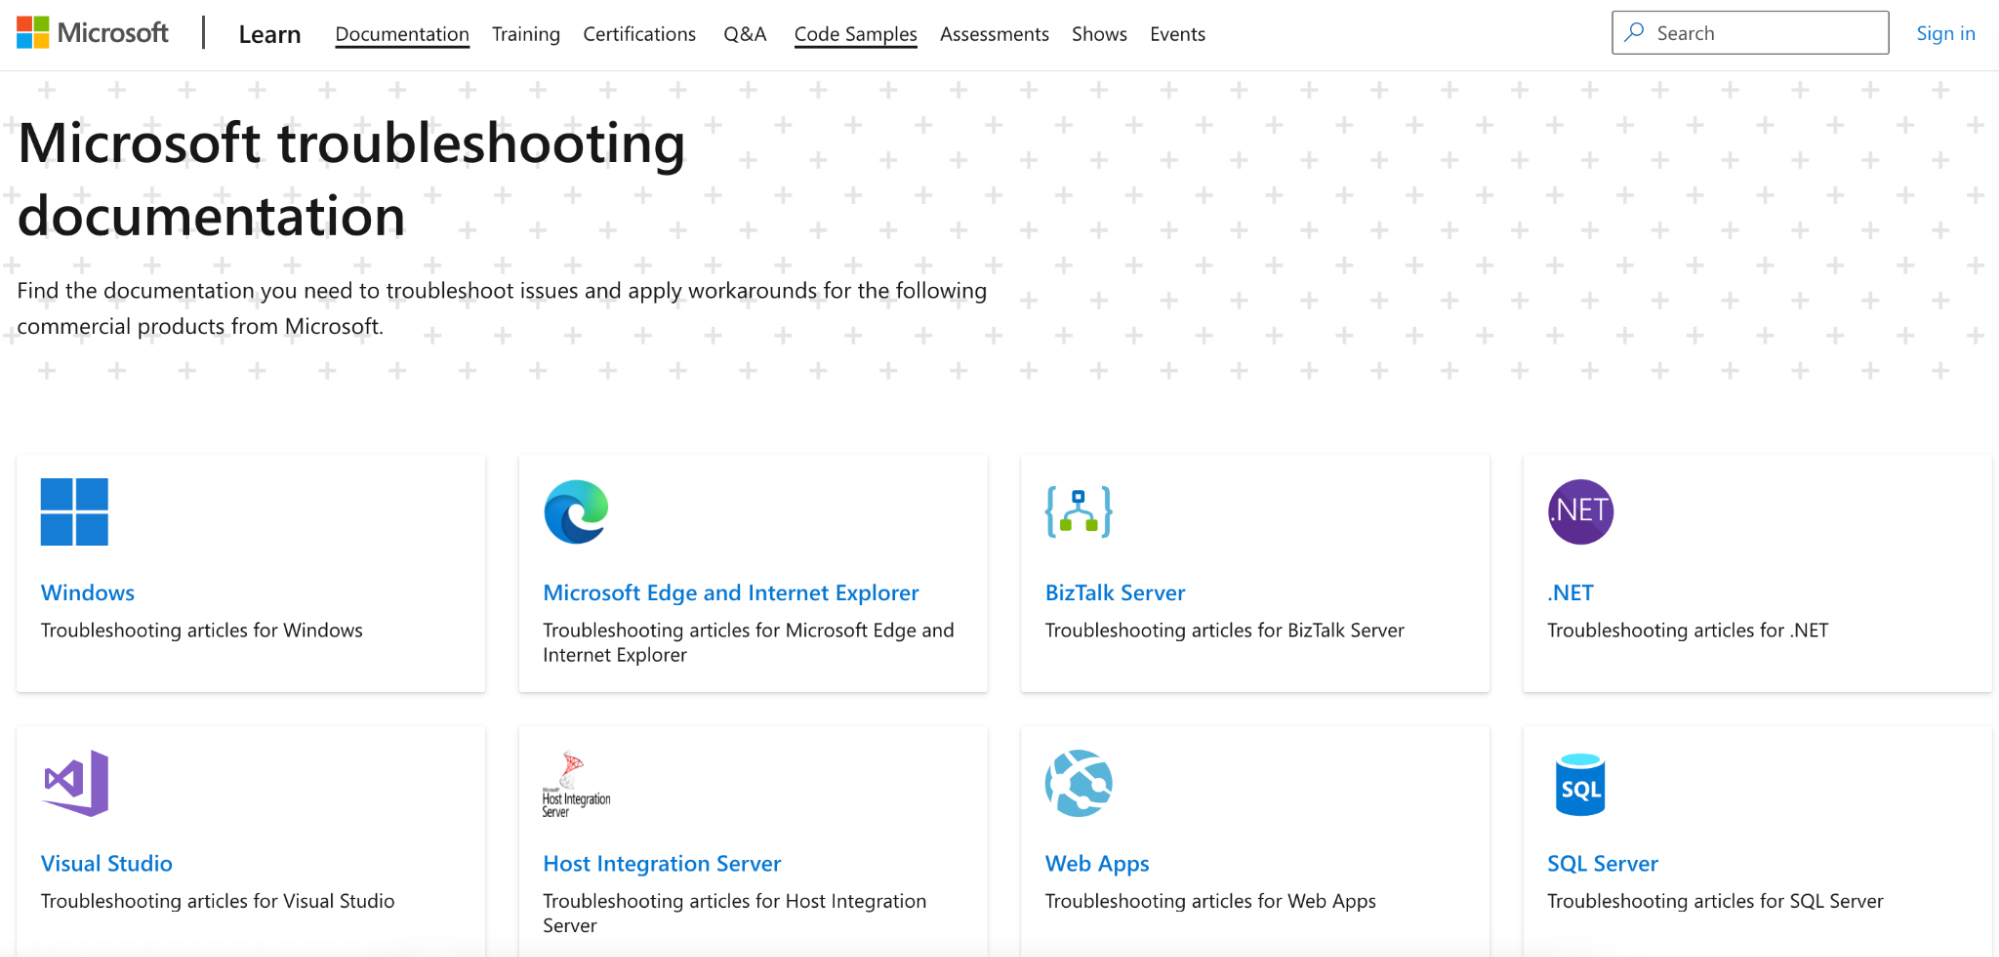 Microsoft’s troubleshooting guide